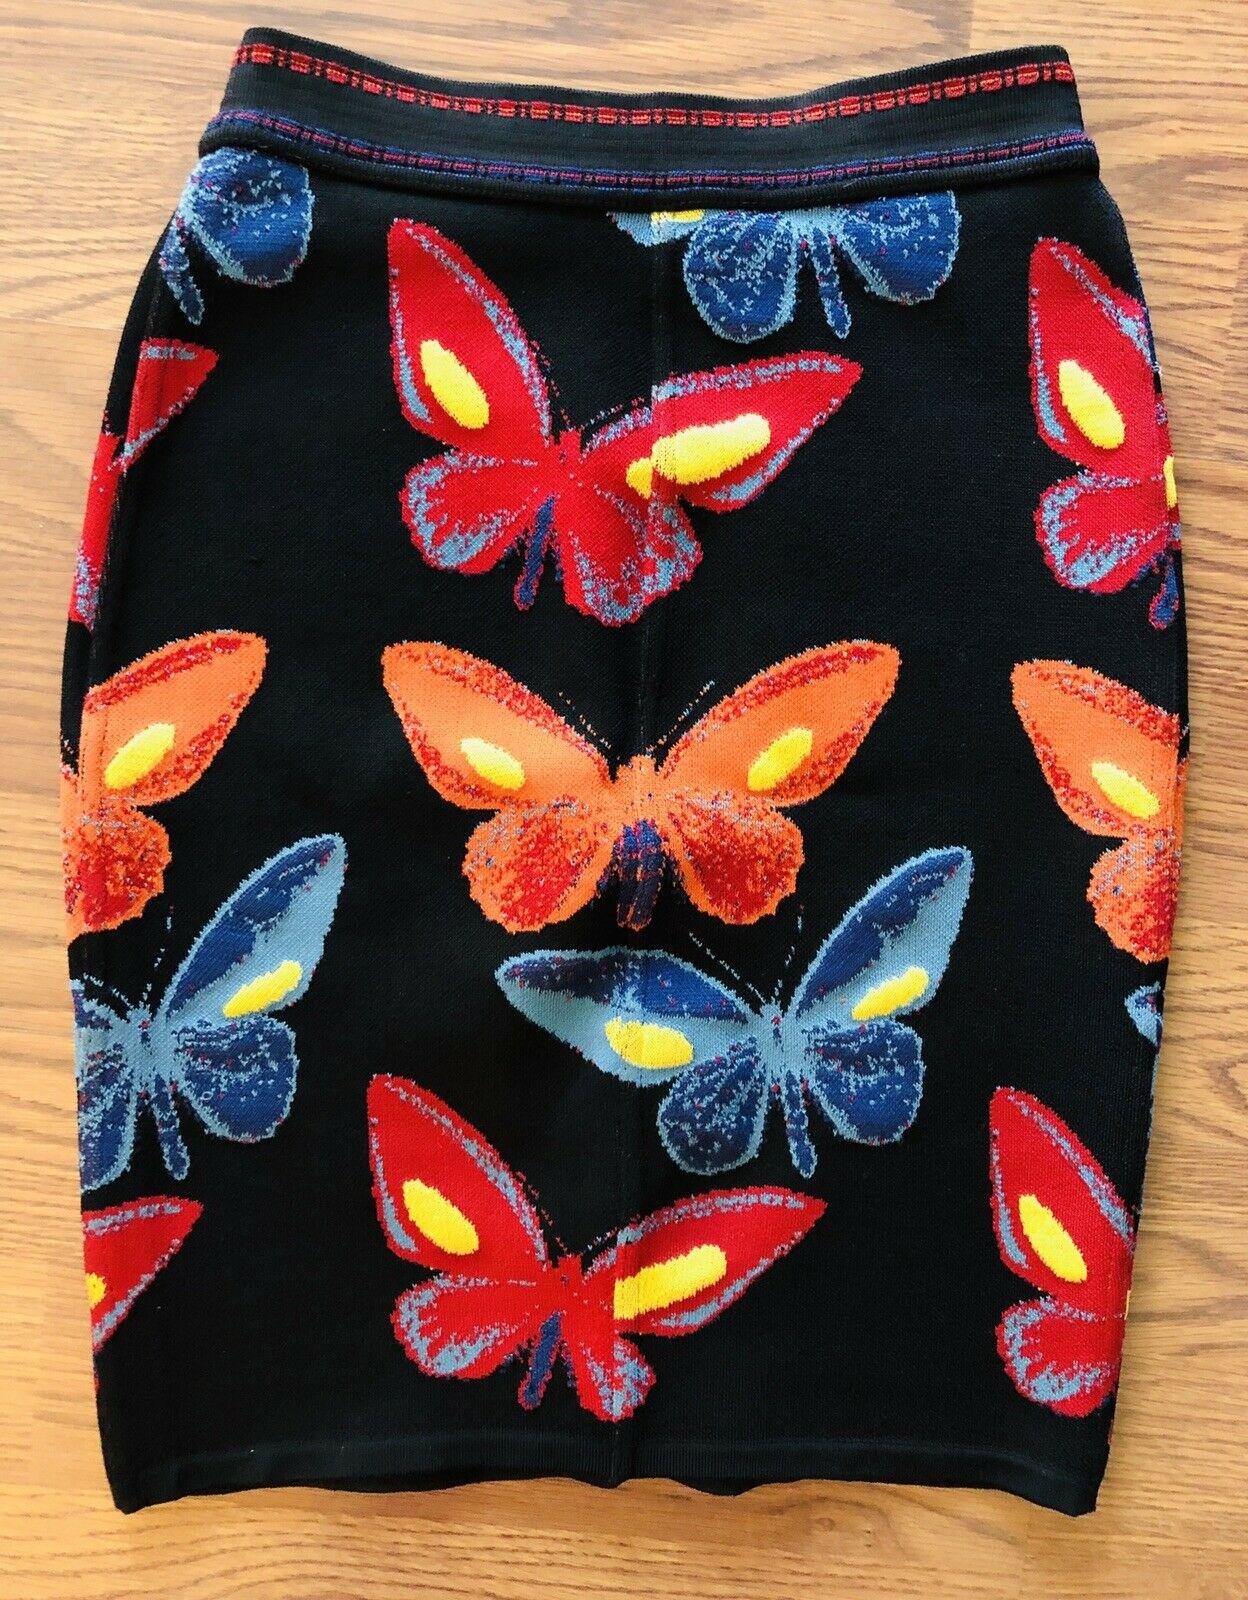 Azzedine Alaia Vintage Butterfly Fitted Skirt XS Iconic Piece!!! Highly Collectible!

Alaïa knitted mini skirt with butterfly pattern throughout and elasticized waistband.

All Eyes on Alaïa

For the last half-century, the world’s most fashionable